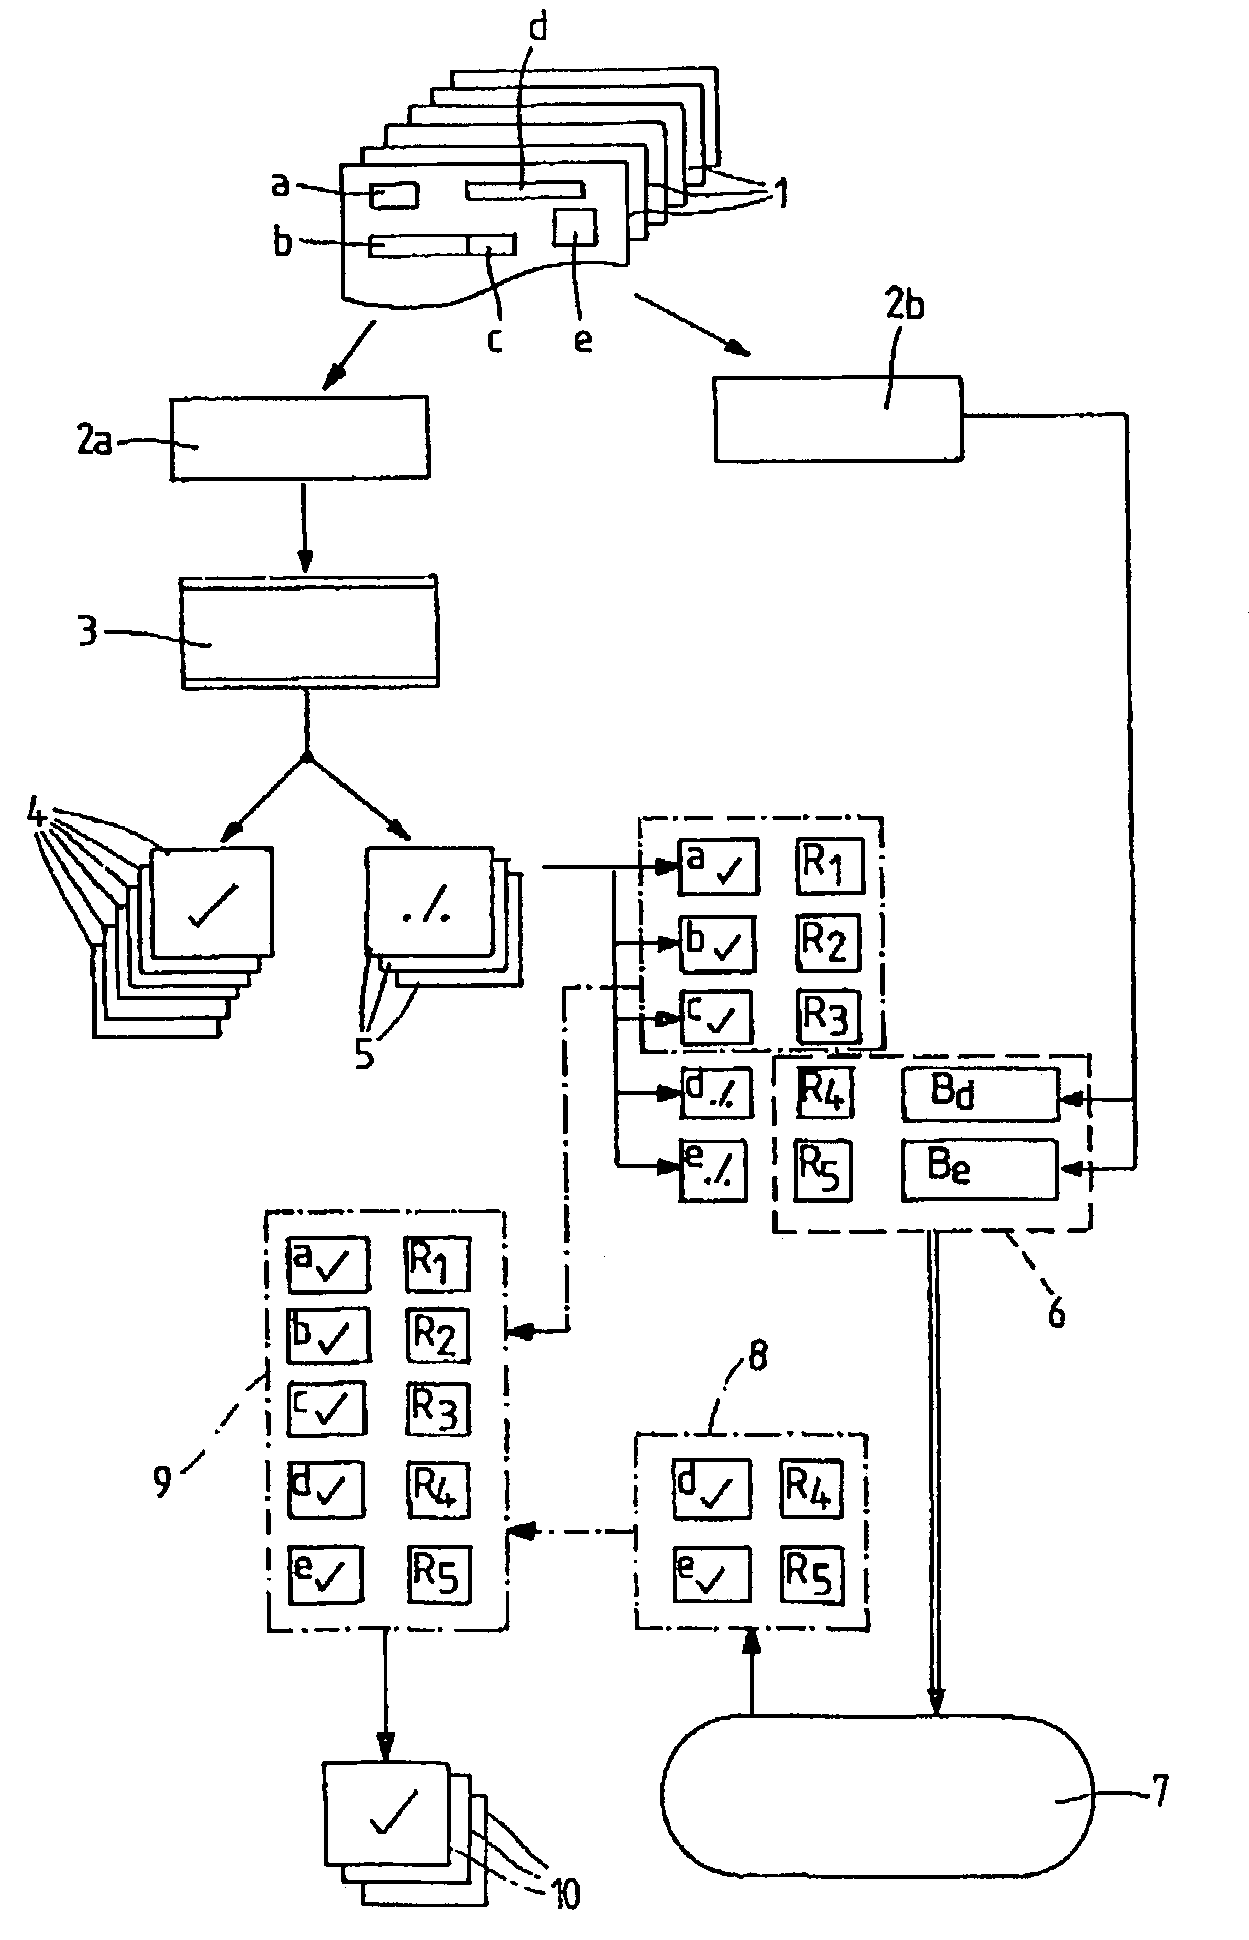 Method for capturing a complete data set of forms provided with graphic characters